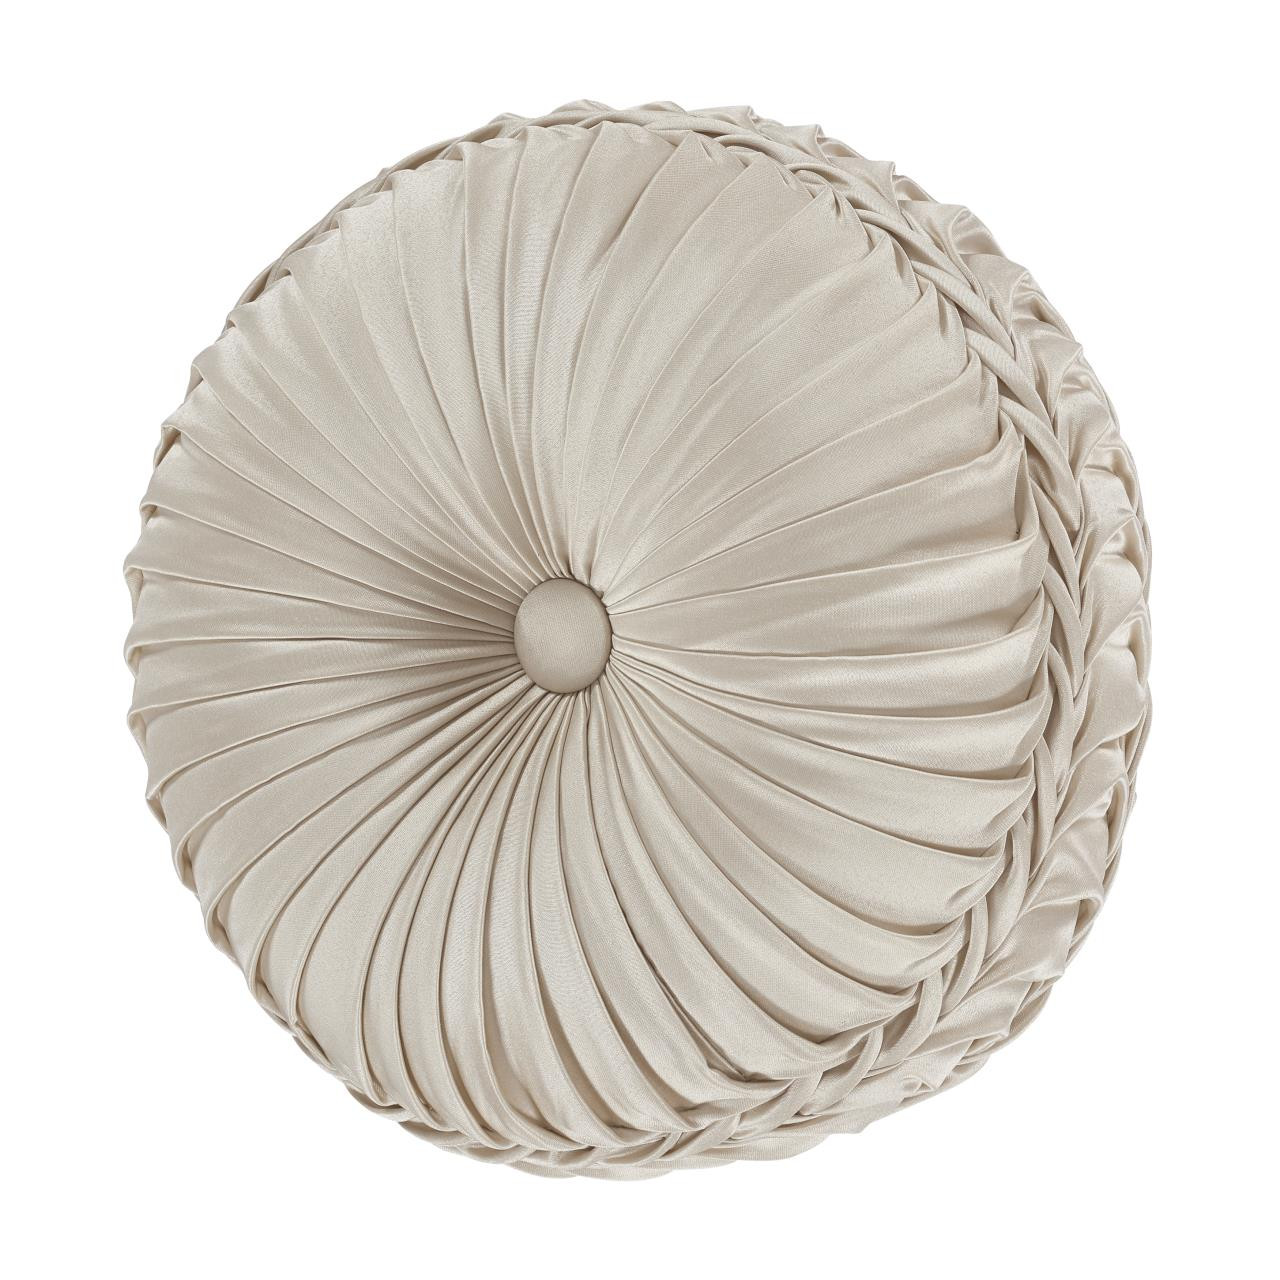 https://cdn10.bigcommerce.com/s-9ese1/products/18965/images/119493/Trinity-Champagne-Tufted-Round-Pillow-193842113882_image1__57196.1607993616.1280.1280.jpg?c=2